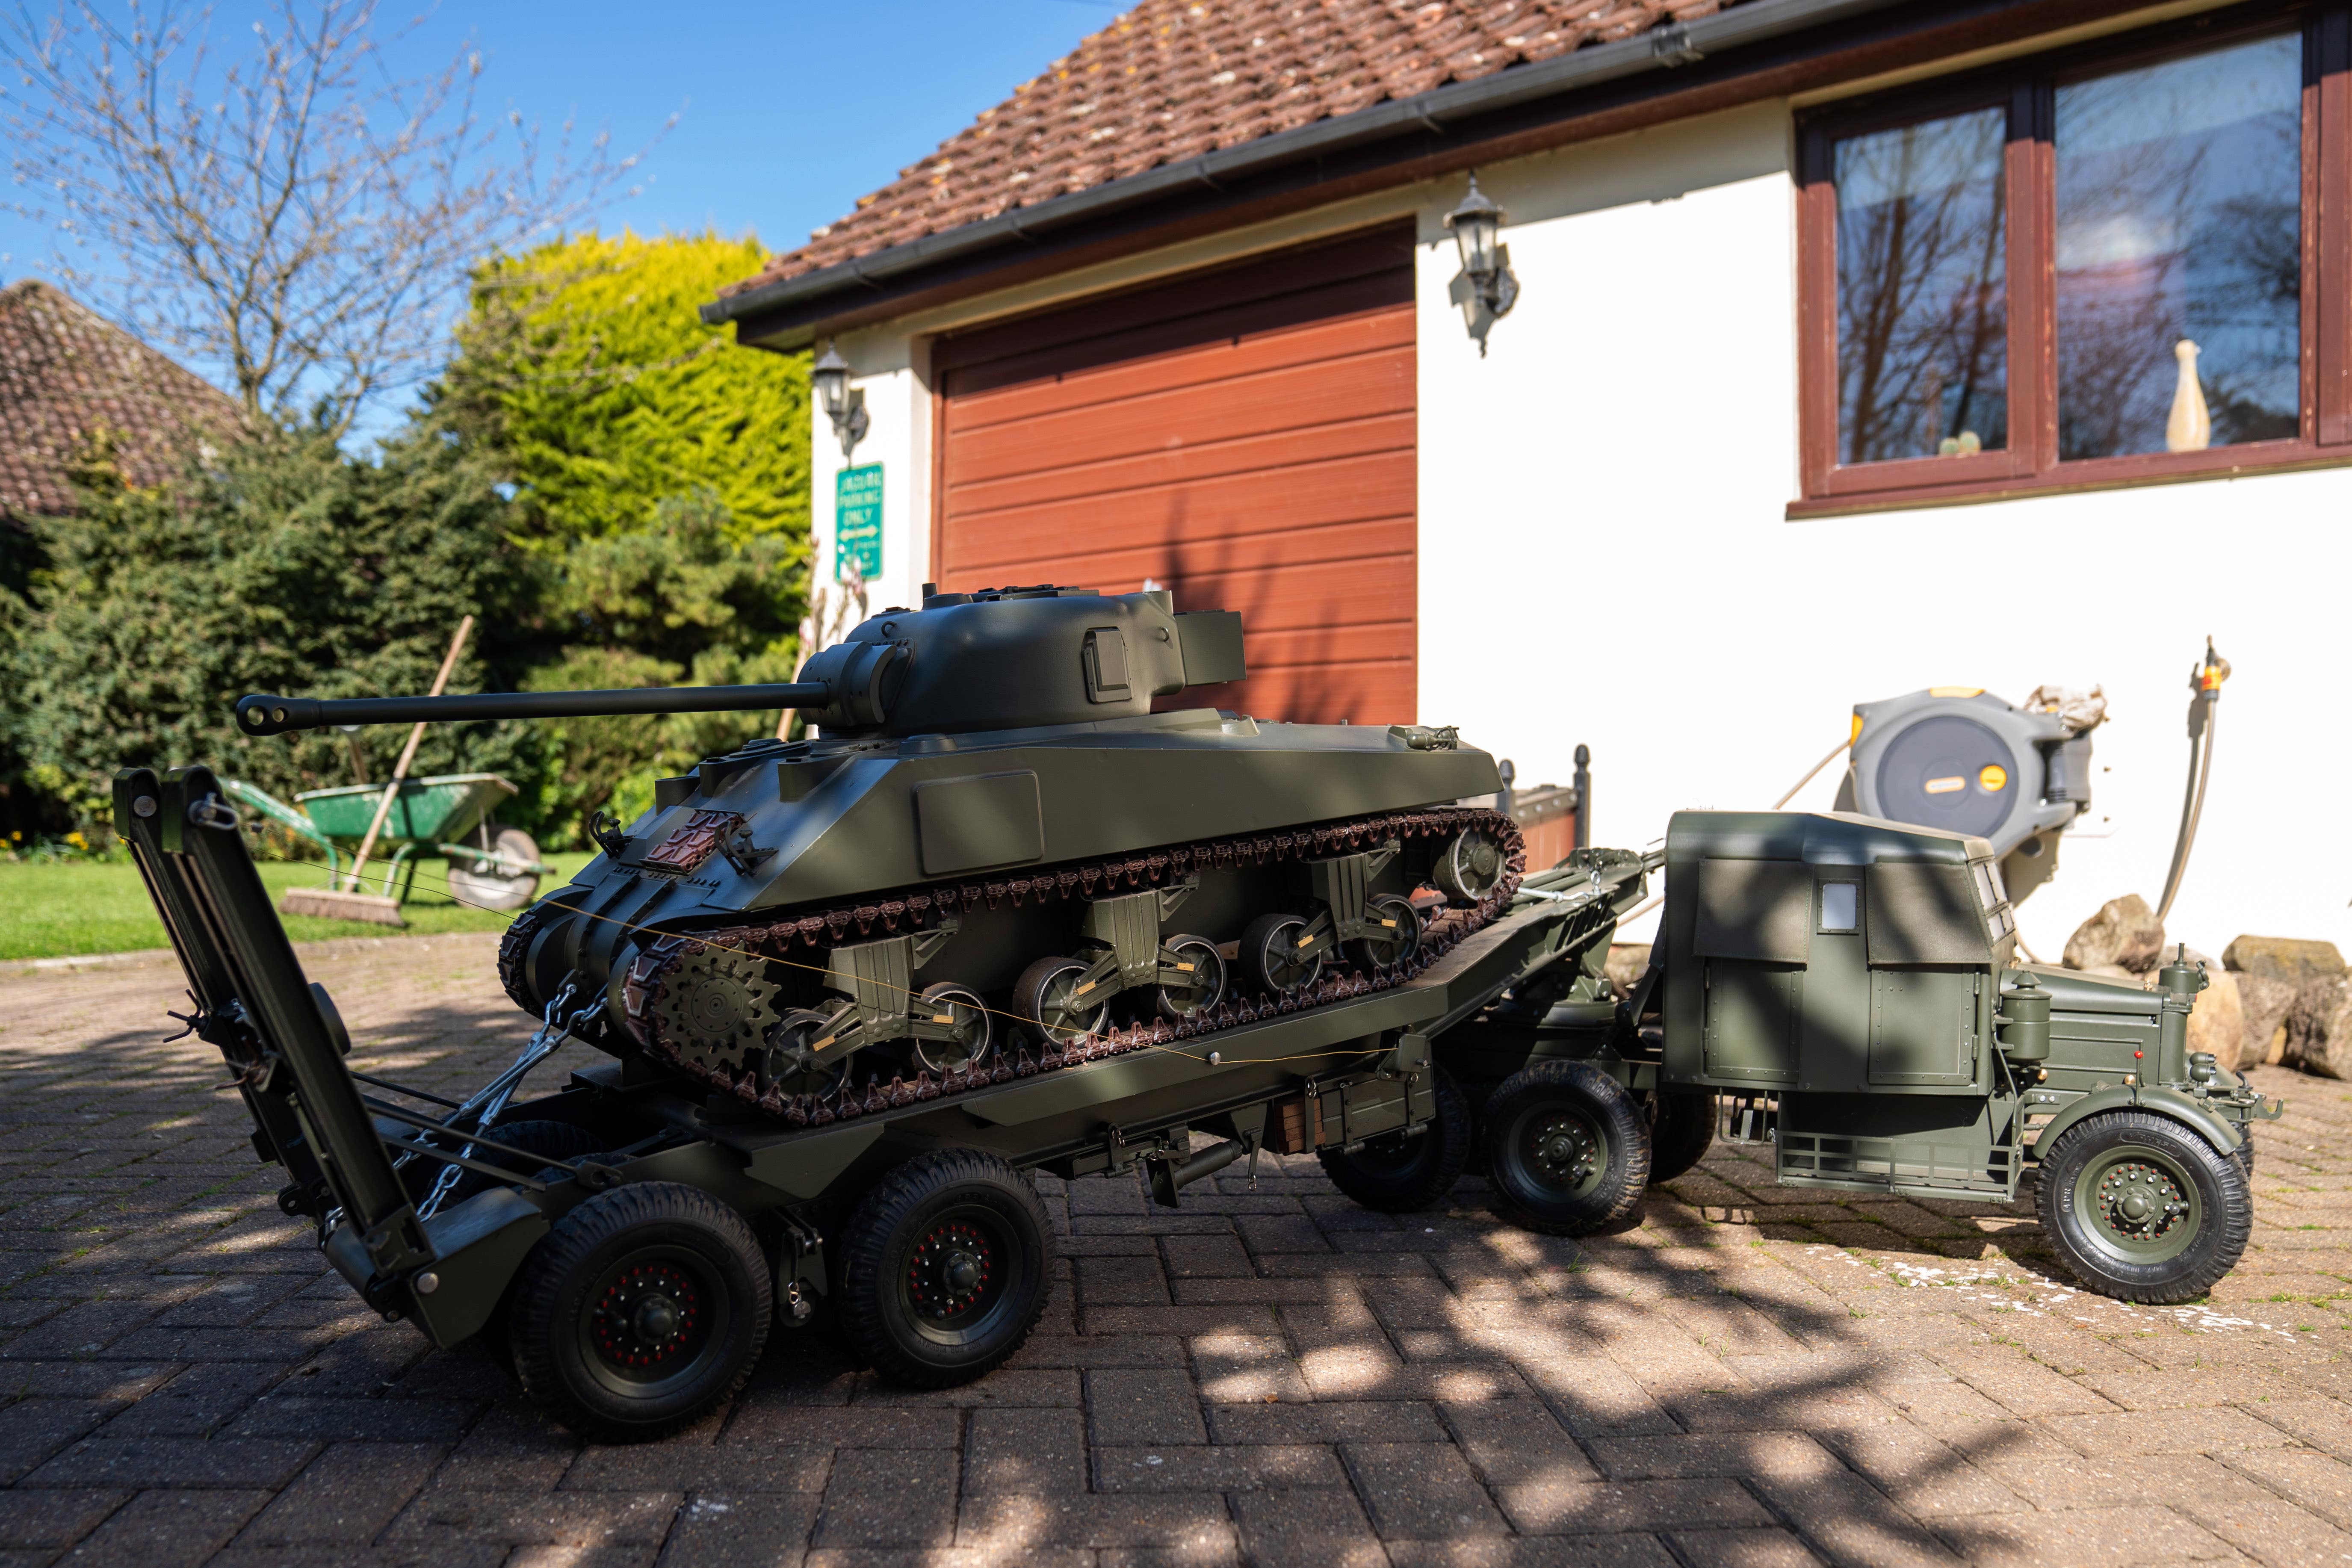 Roland Hopper, 79, built the scale model tank and transporter as he was bored in retirement (Joe Giddens/PA)